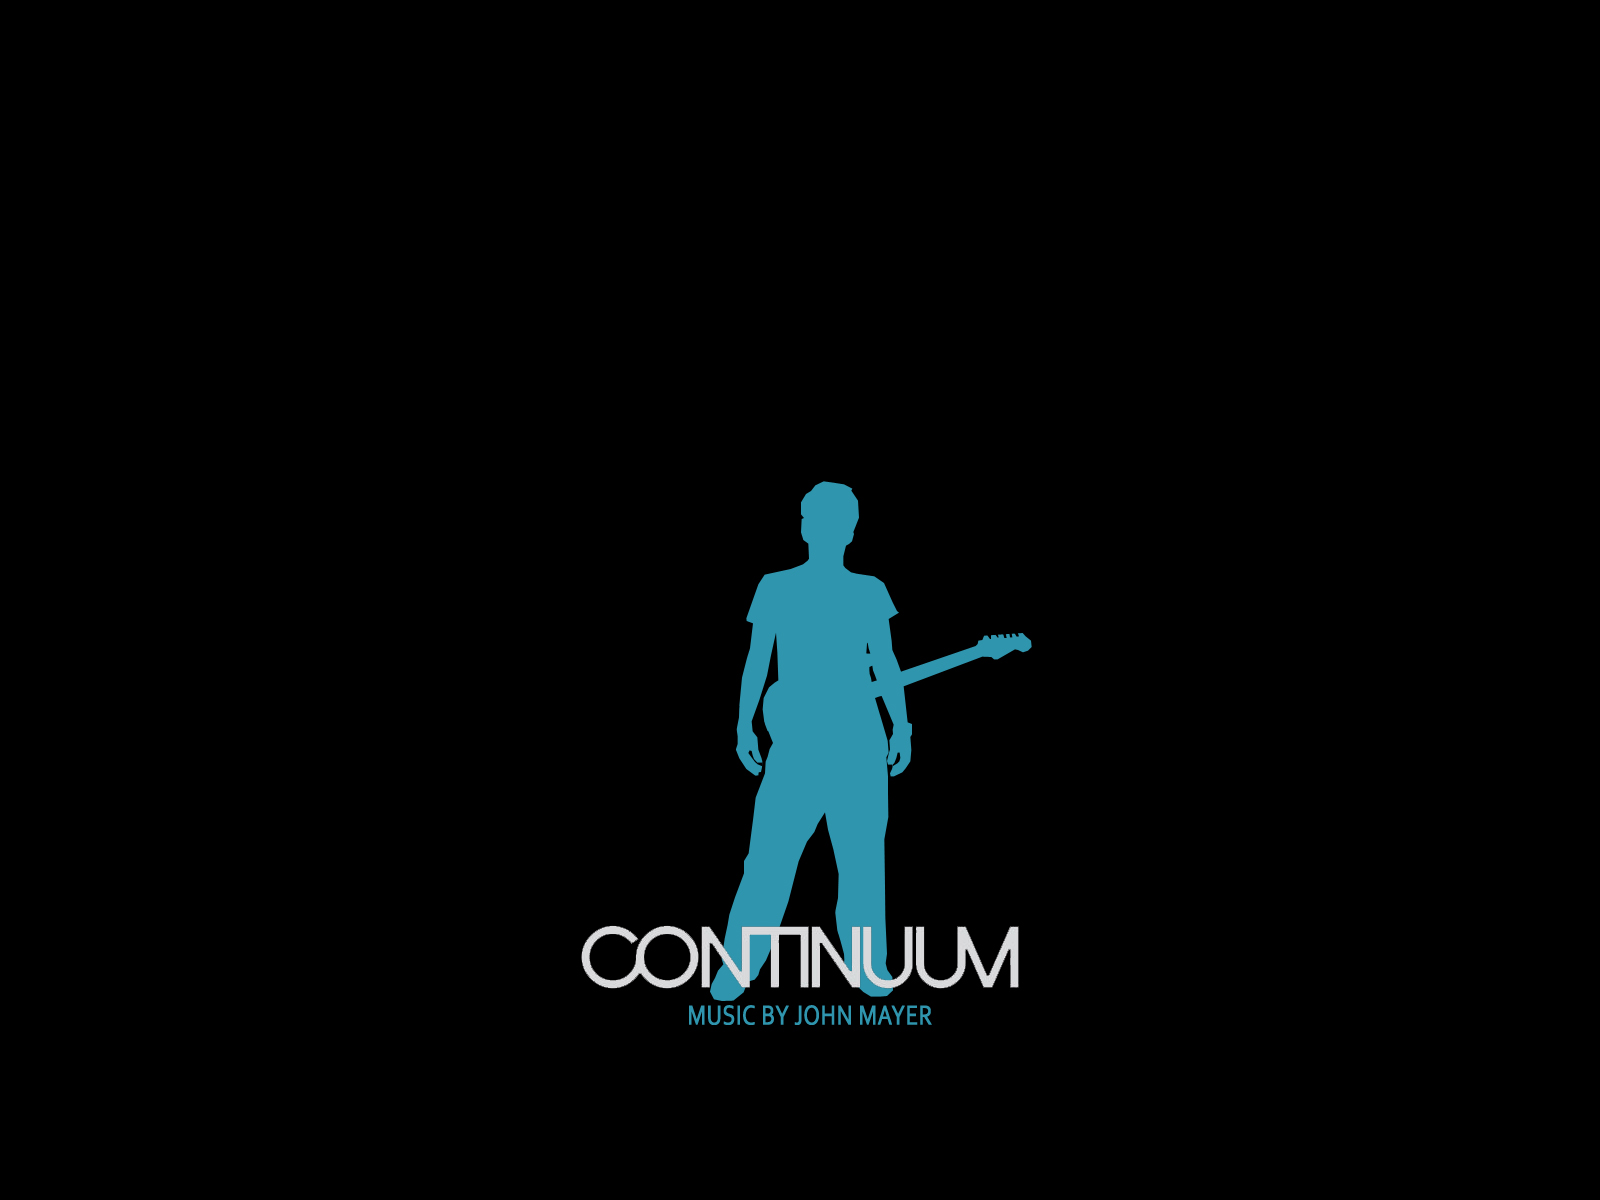 John Mayer Continuum Wallpaper By Spartacus41